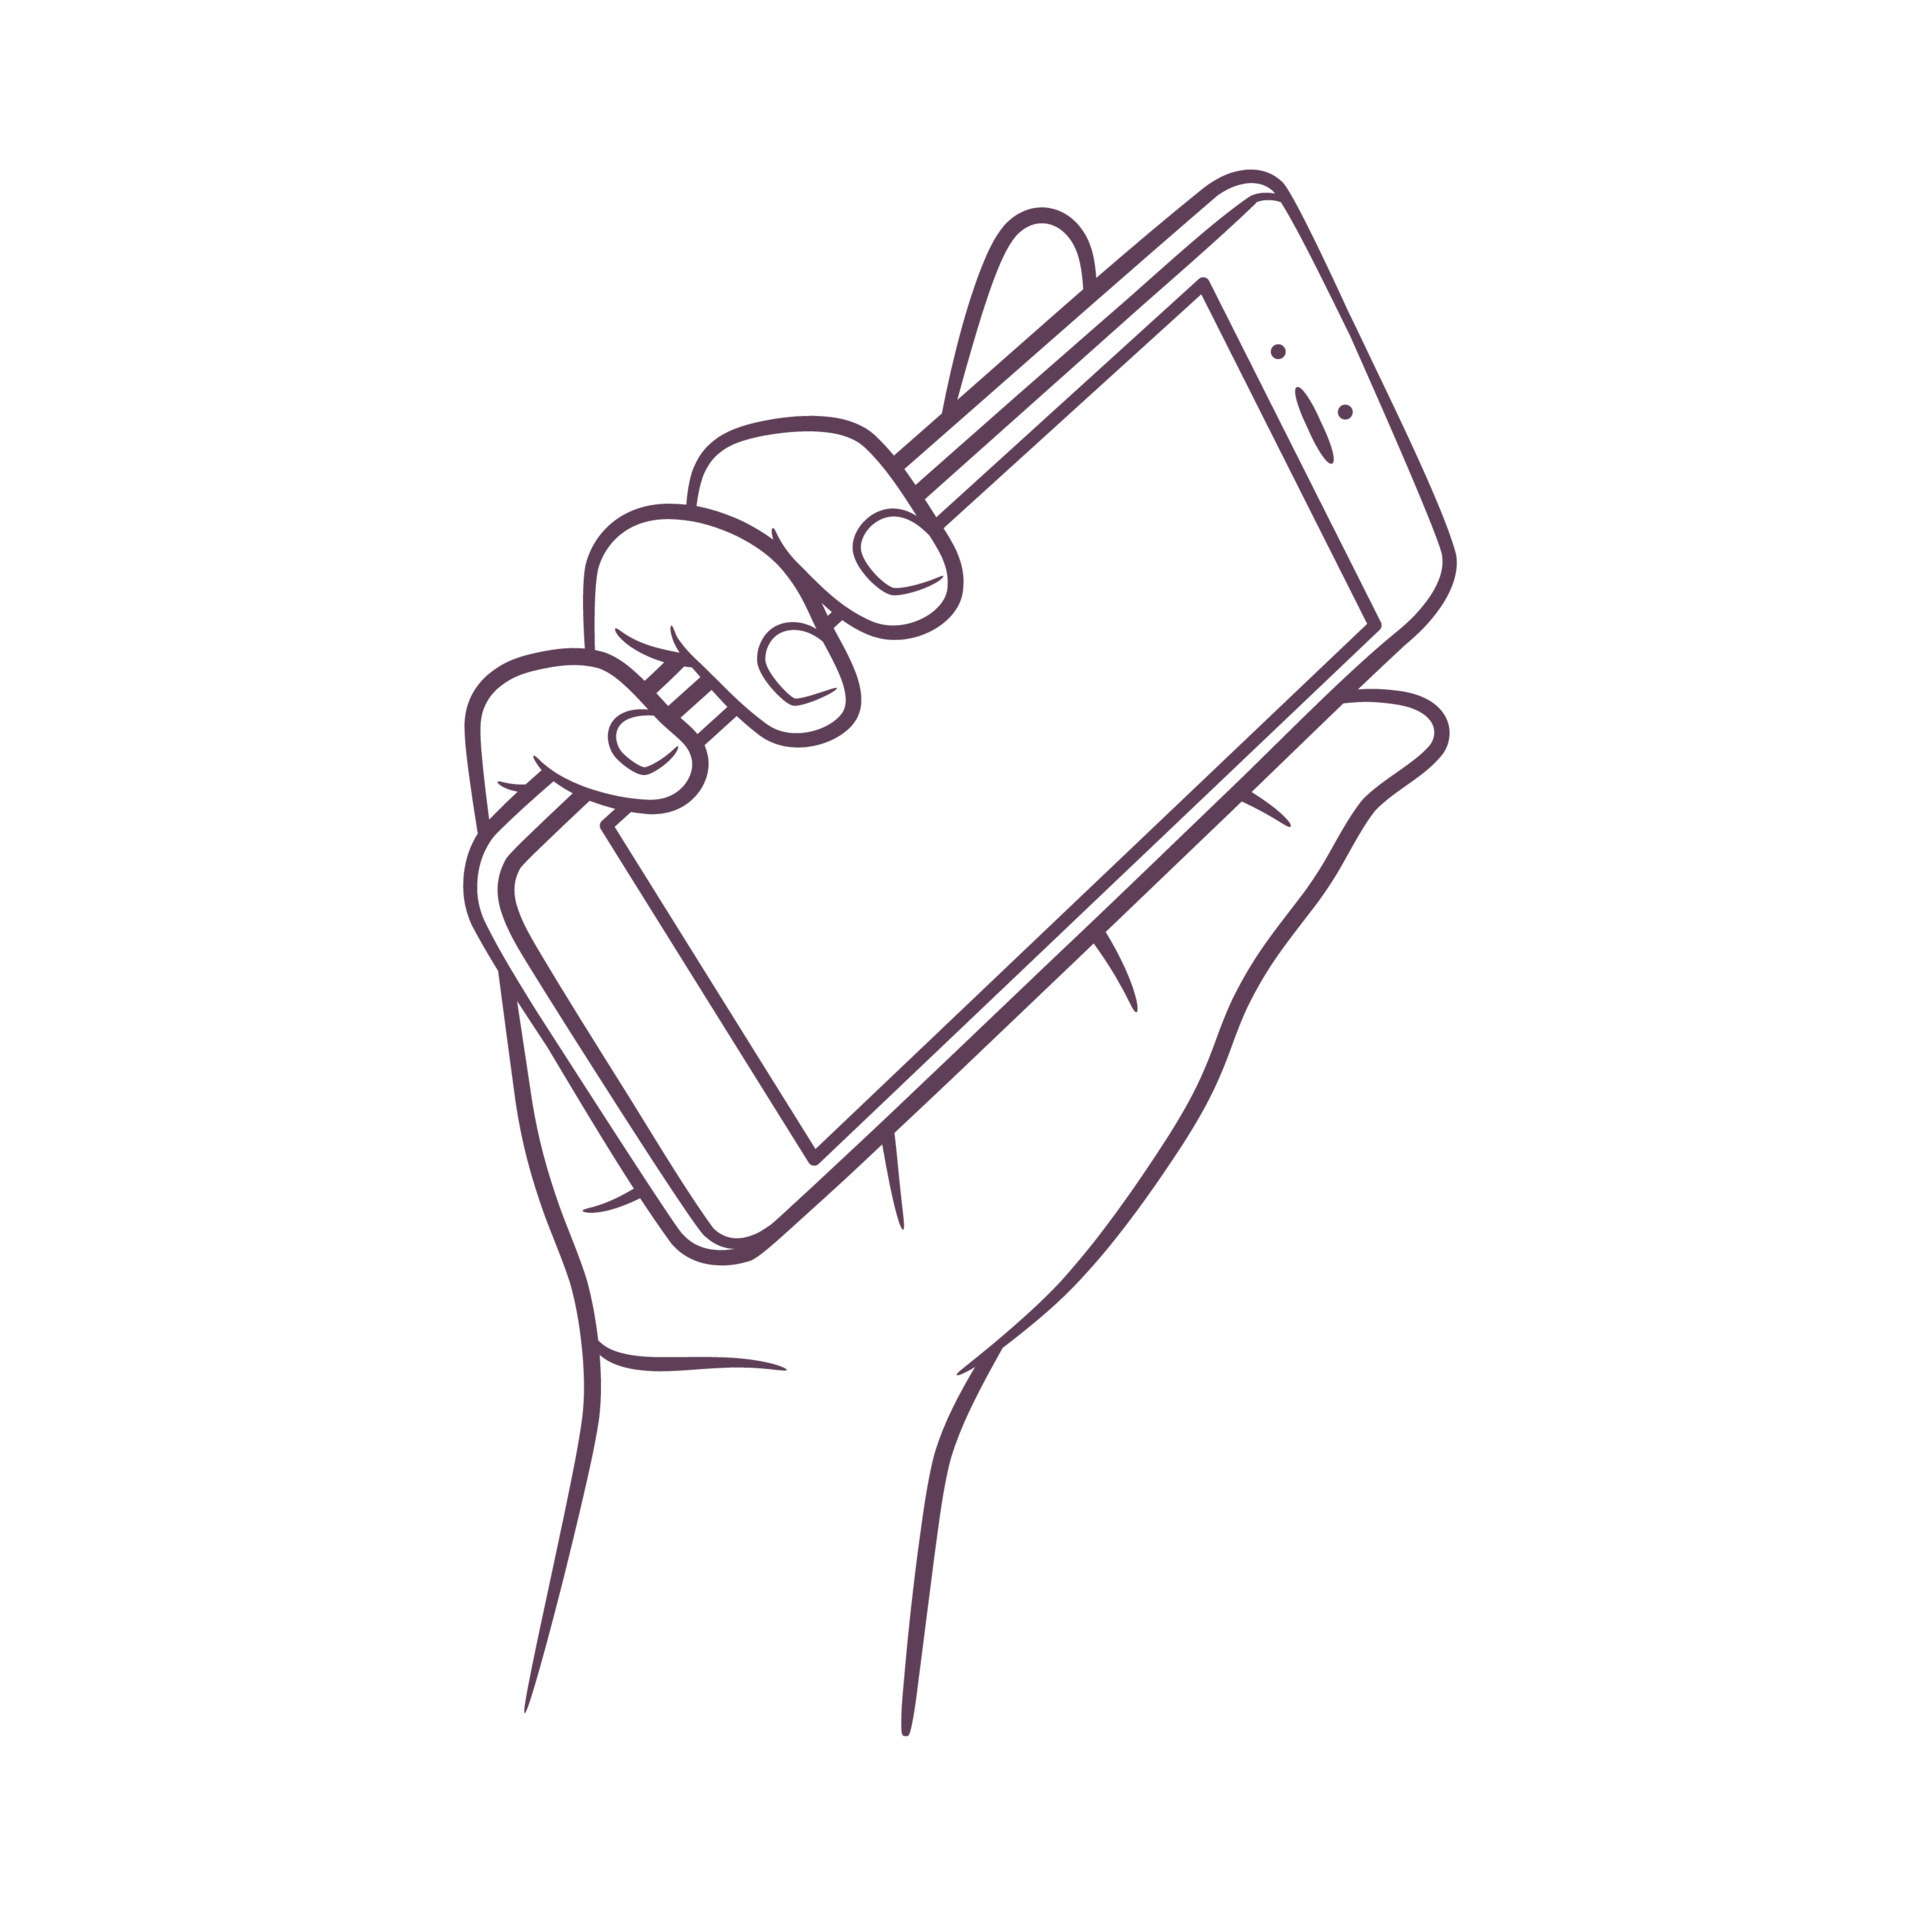 Hand Holding Smart Phone Empty Screen Drawing HighRes Vector Graphic   Getty Images